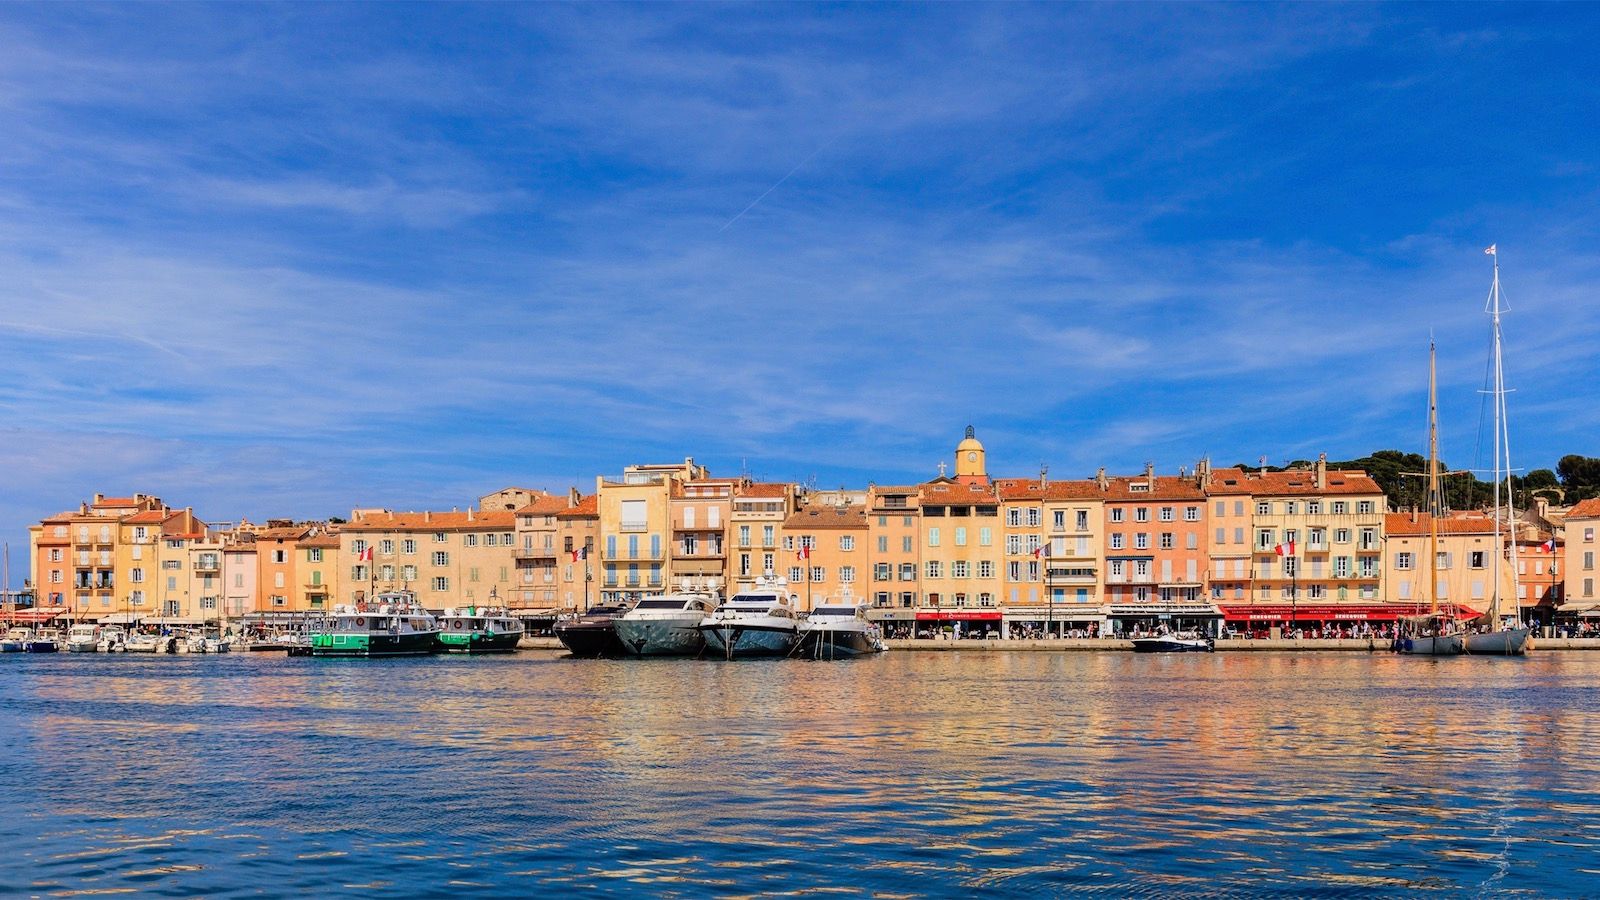 Saint-Tropez is one of the most visited and glamorous cities on the French Riviera with a beautiful old town. A string of trendy shops, bars and restaurants face the bay, where you can always see yachts moored, some really luxurious.